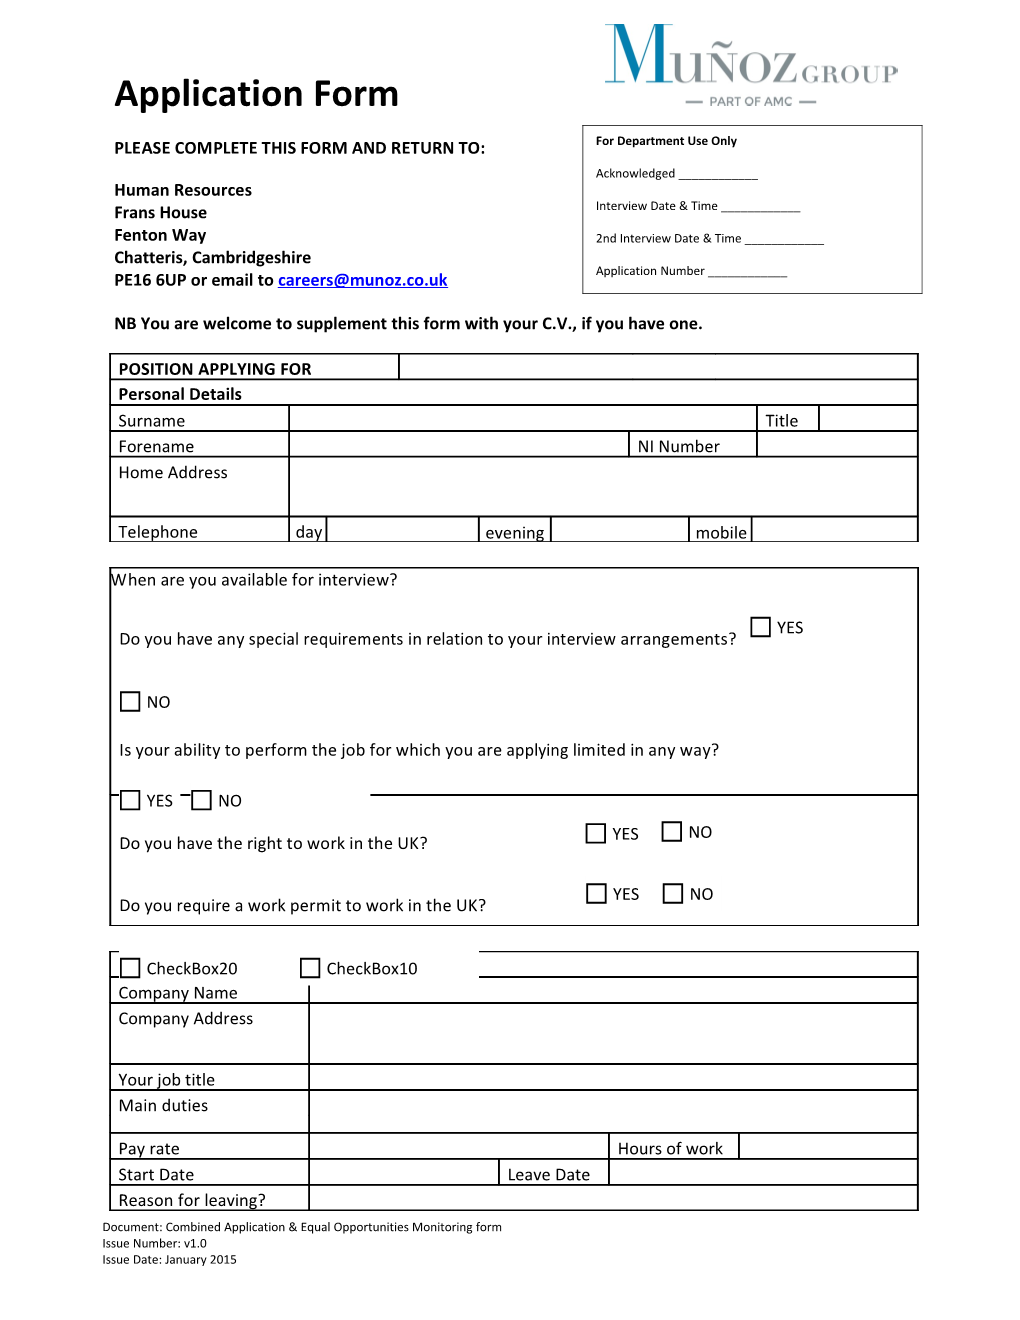 NB You Are Welcome to Supplement This Form with Your C.V., If You Have One